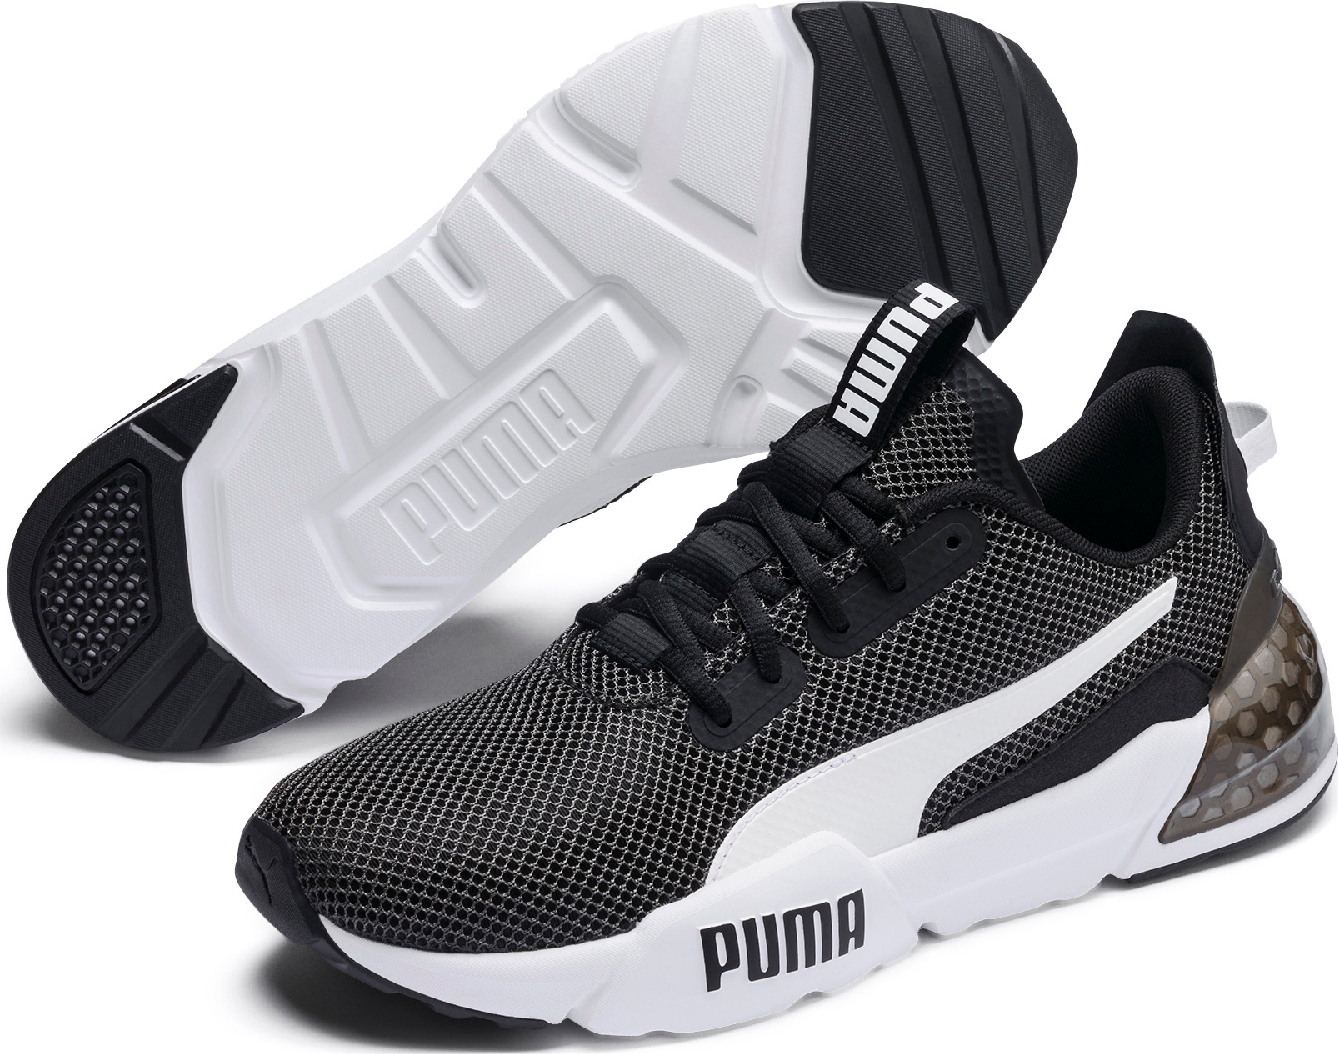 puma cell phase shoes